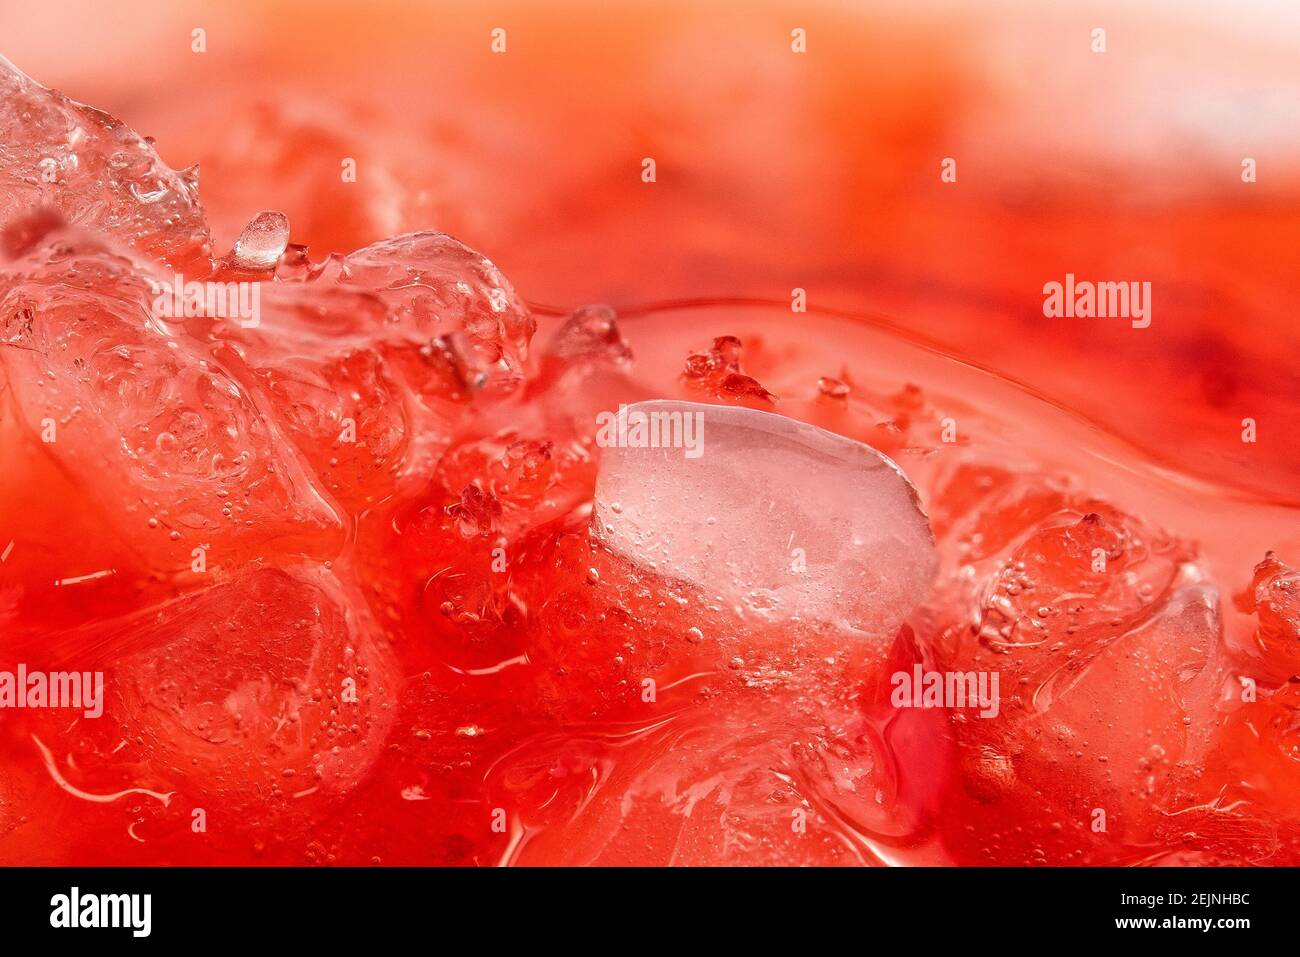 Extreme close-up of frappe ice on a strawberry, daiquiri cocktail. Stock Photo